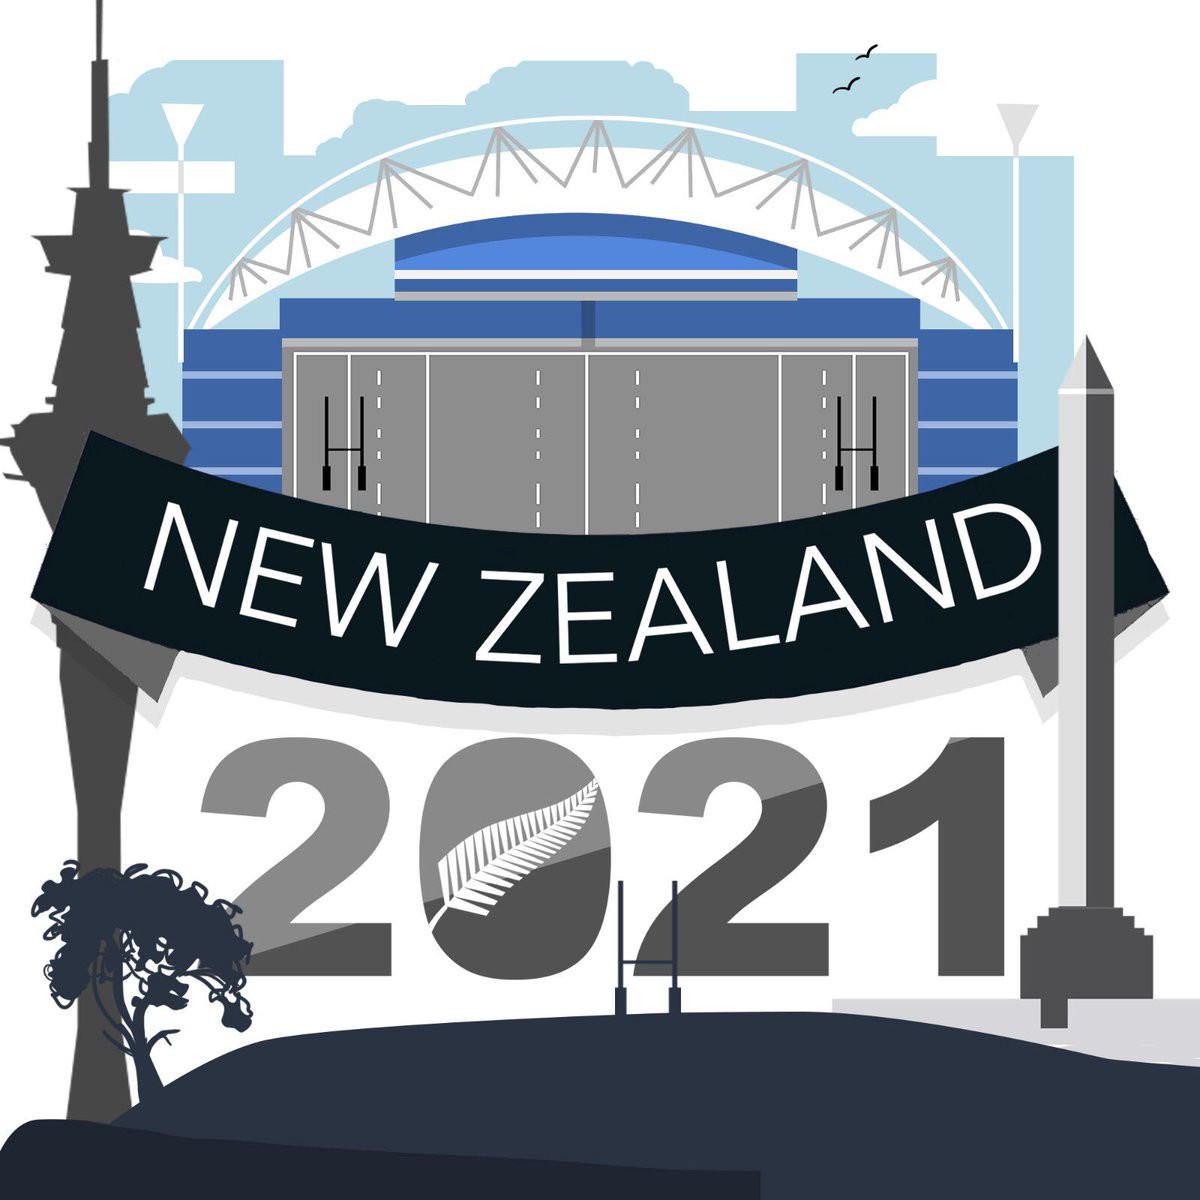 New Zealand awarded 2021 Women’s Rugby World Cup ahead of Australia